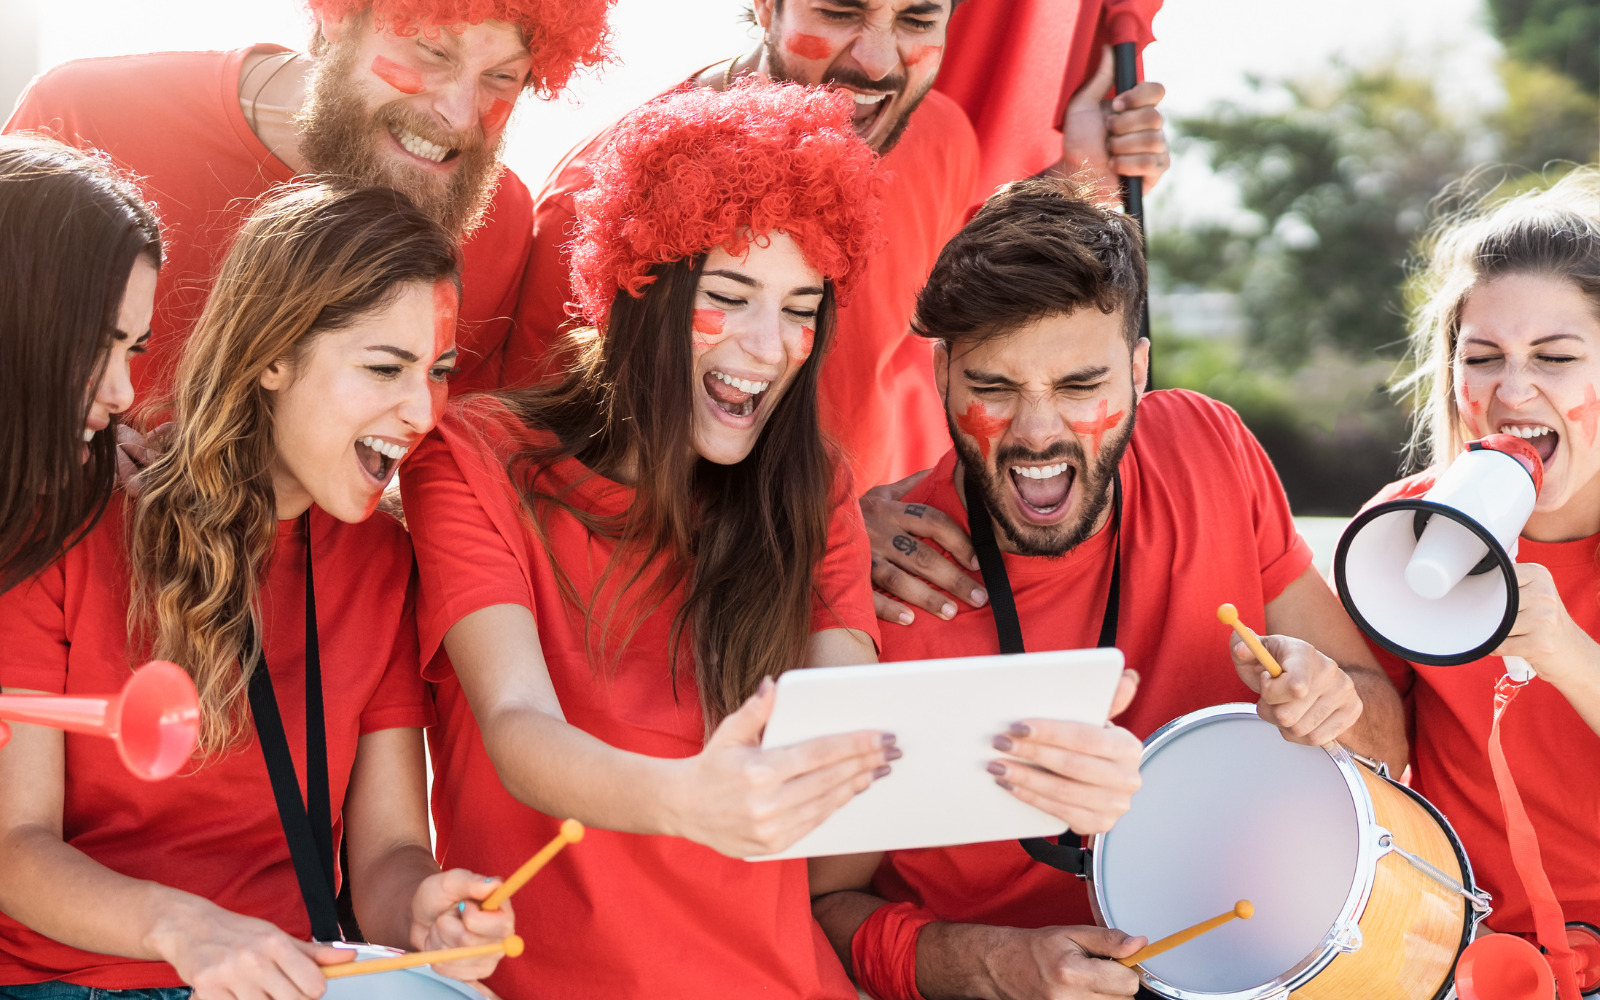 A group of sport fans in red cheering at a handheld tablet one of them is holding.